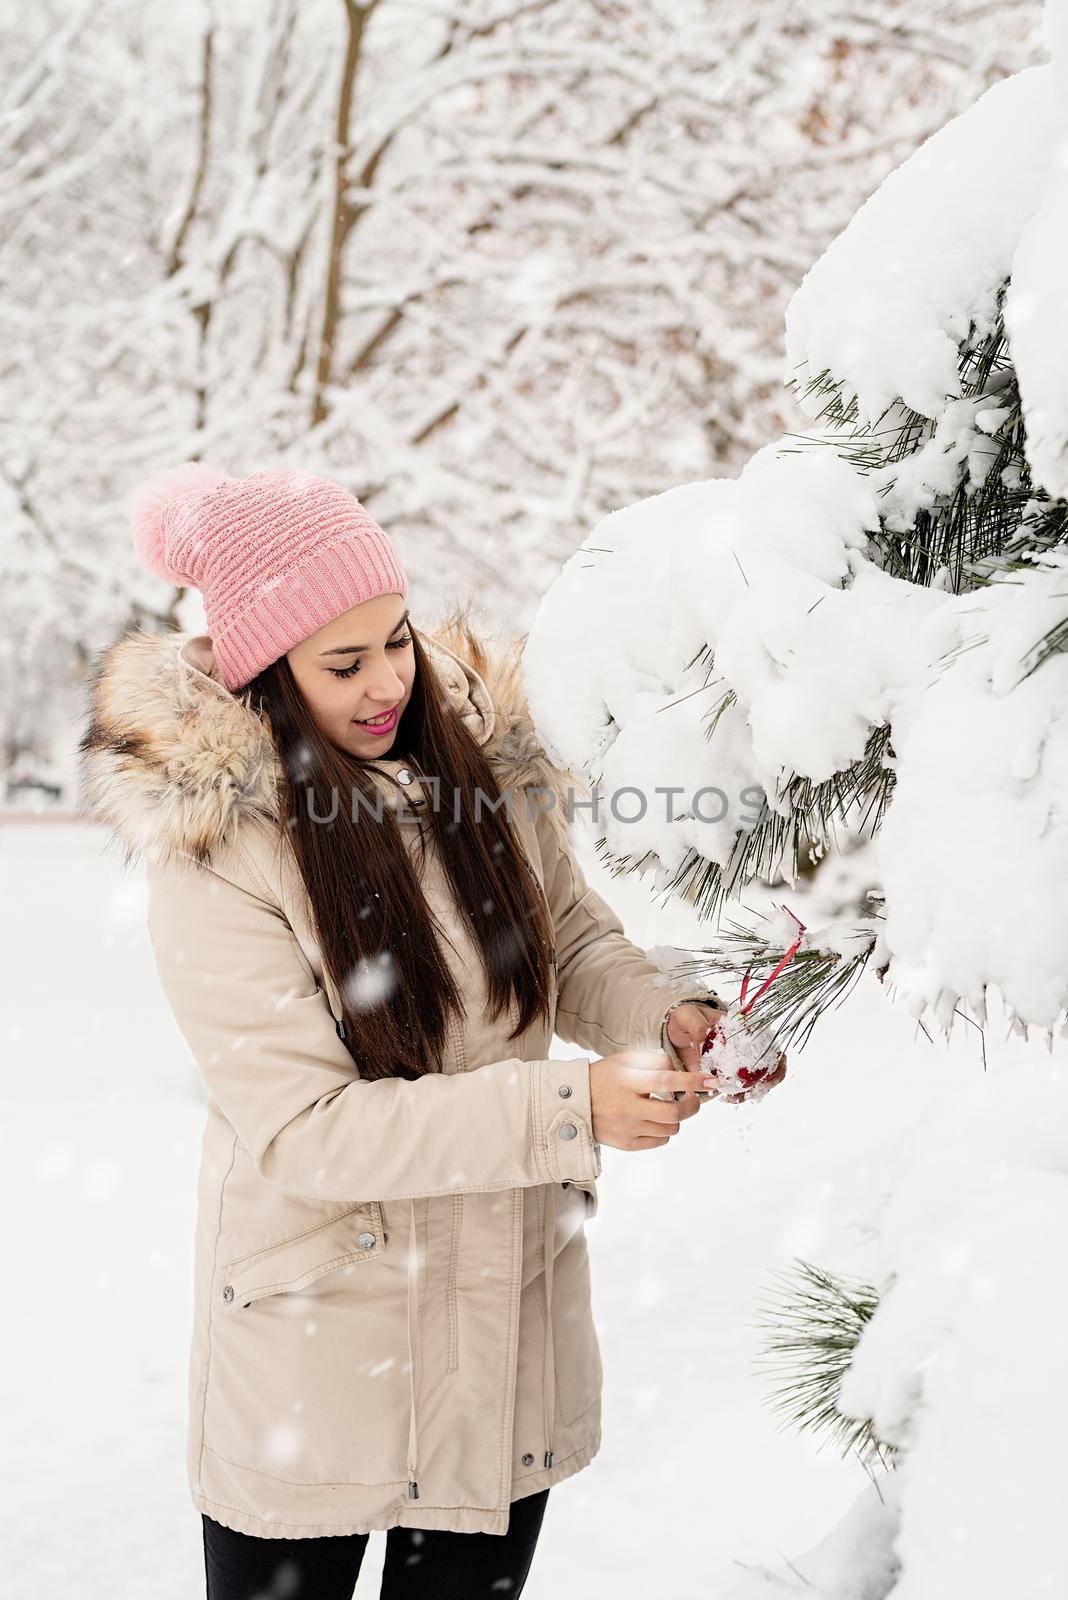 Beautiful woman in warm winter clothes decorating Christmas tree in a park in snowy day by Desperada